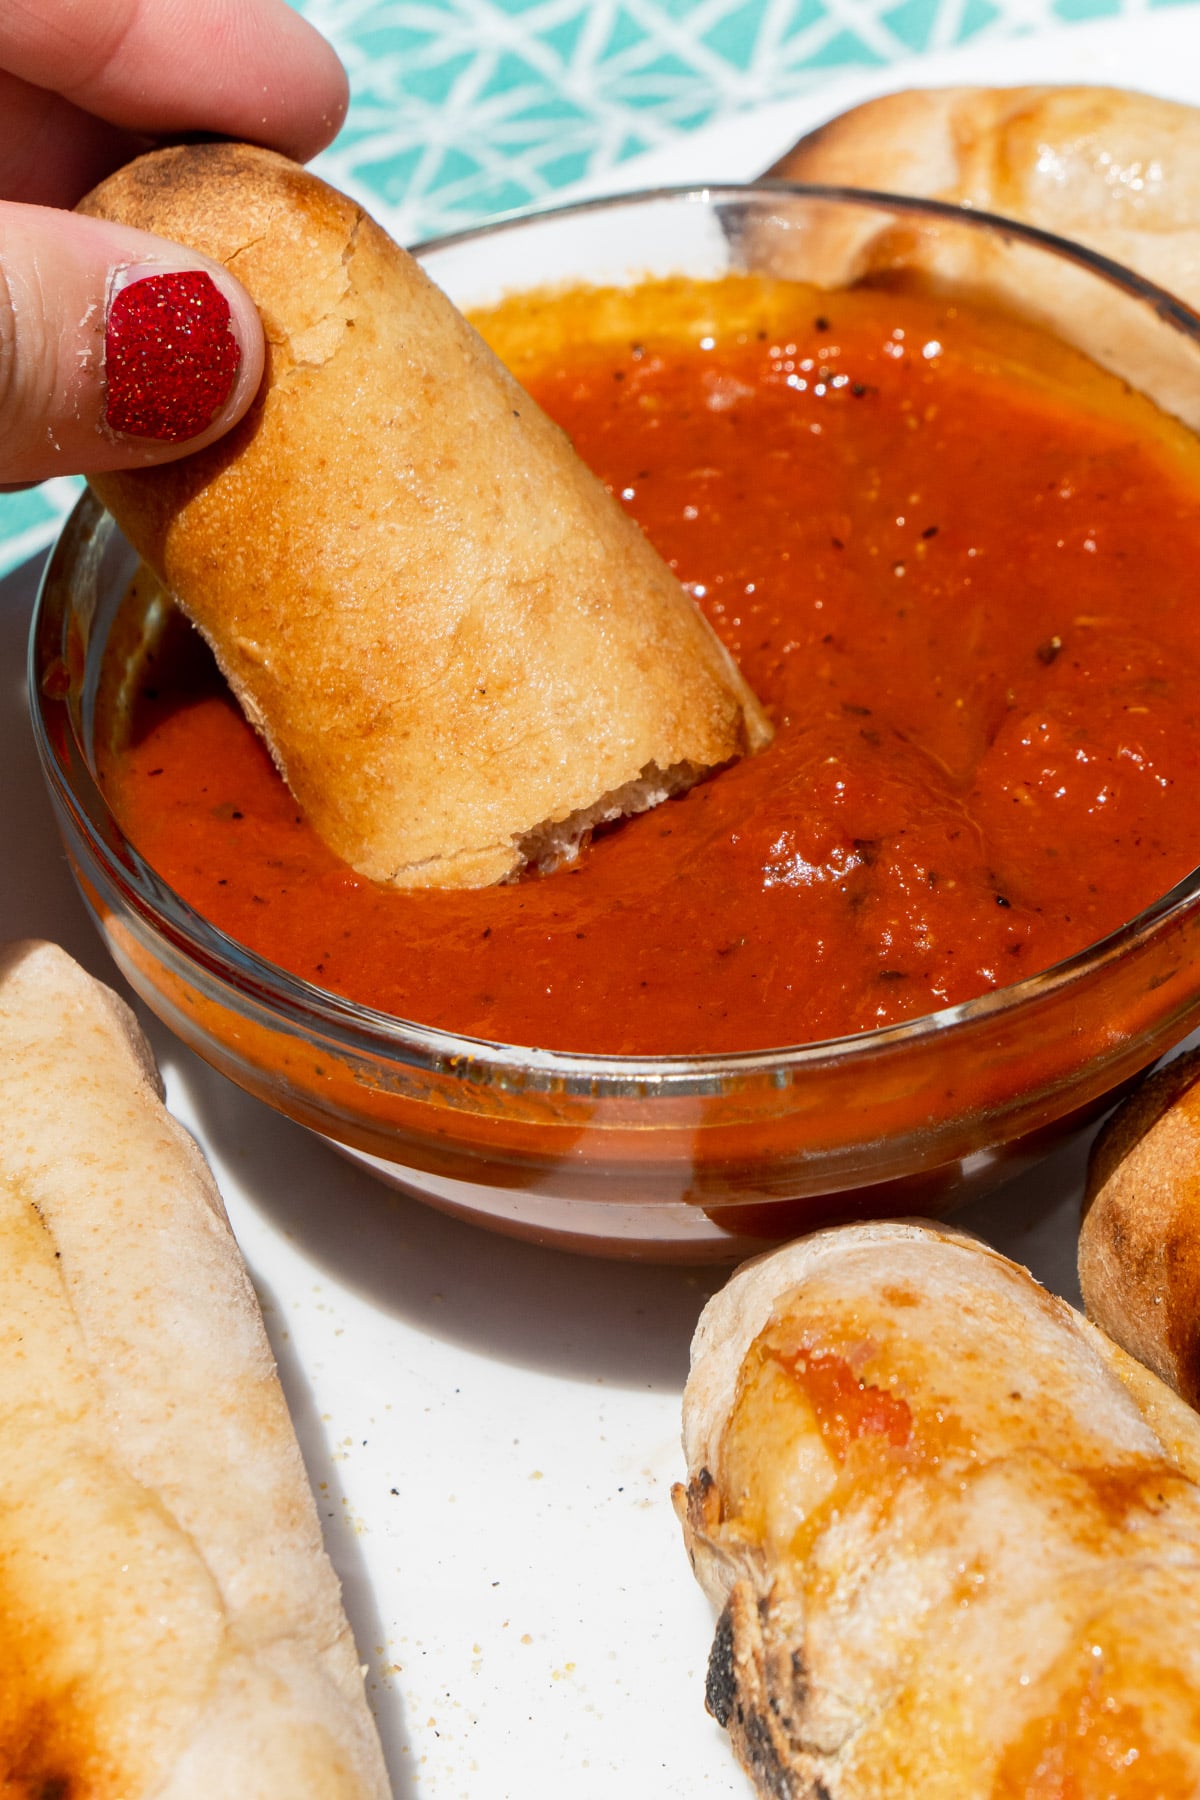 Woman's hand dipping pepperoni rolls into pizza sauce